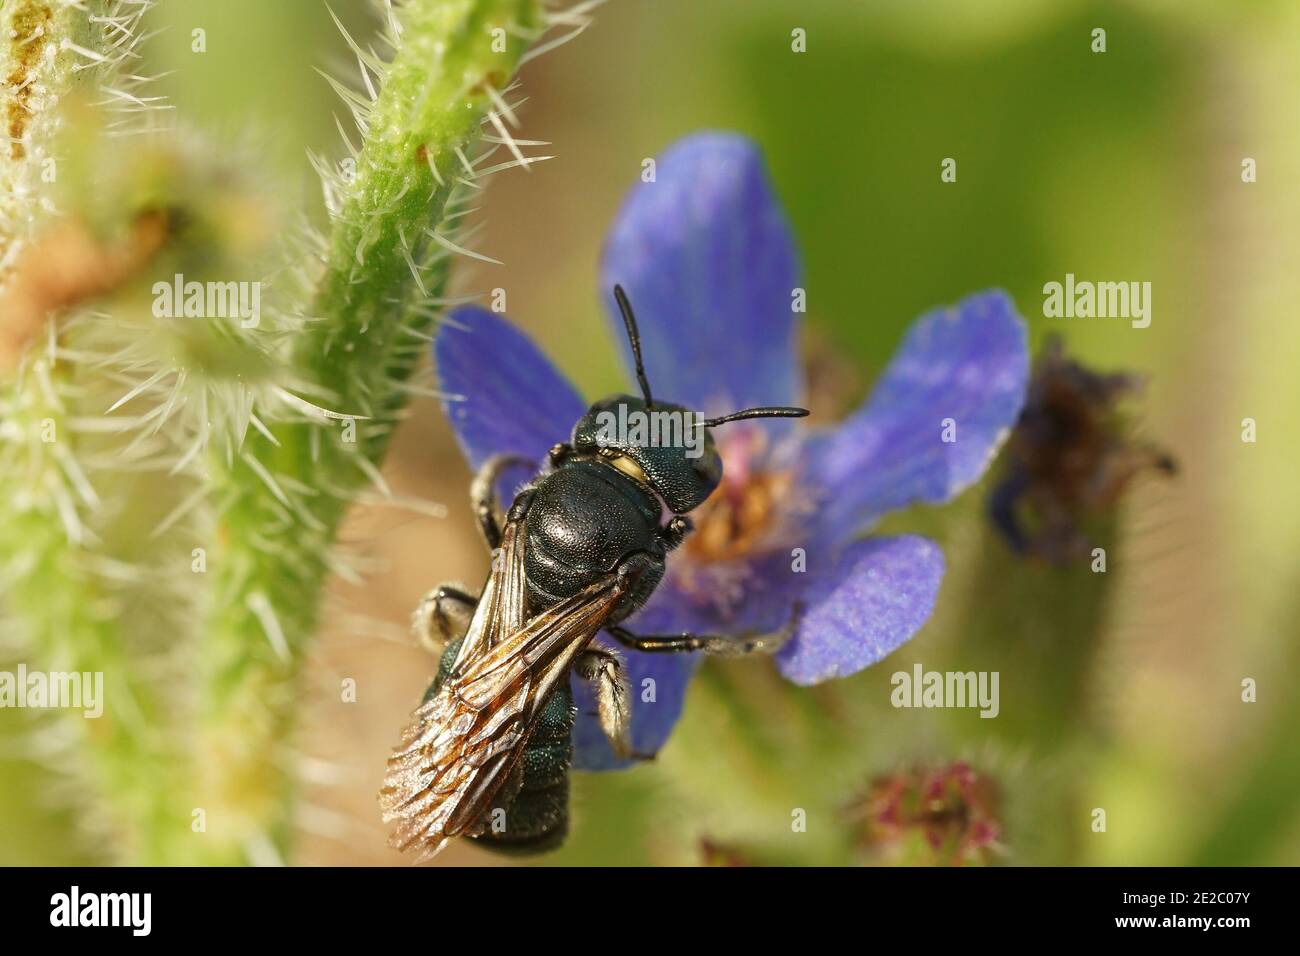 One of the larger carpenter bees, Ceratina chalcites on a blue flower Stock Photo